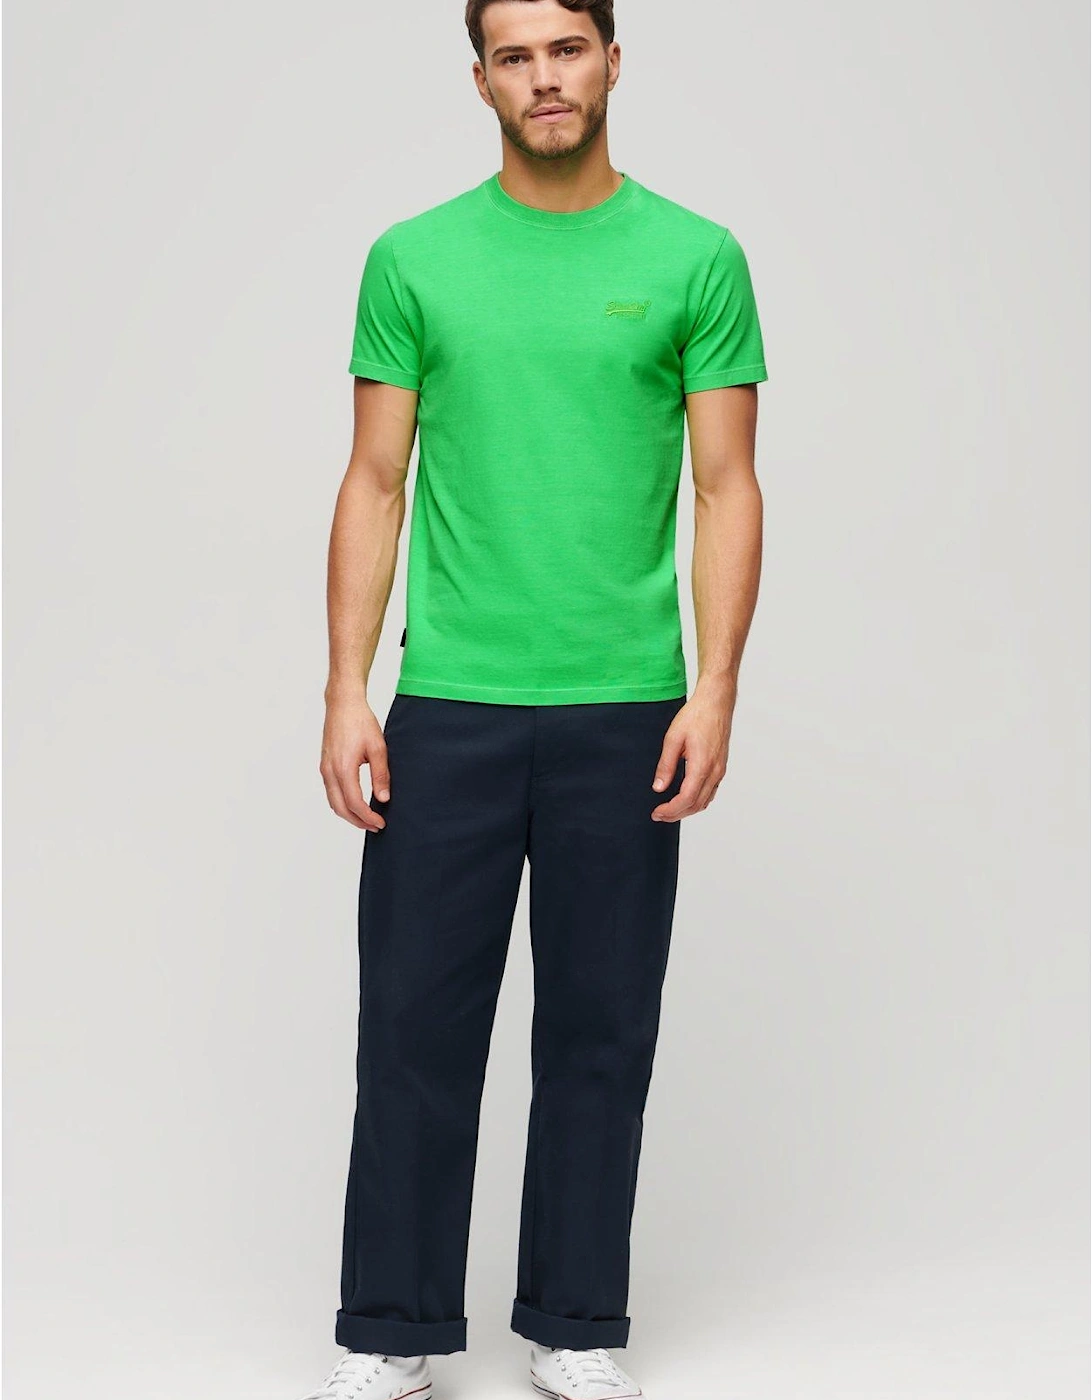 Essential Embroidered Logo Neon T-shirt - Bright Green